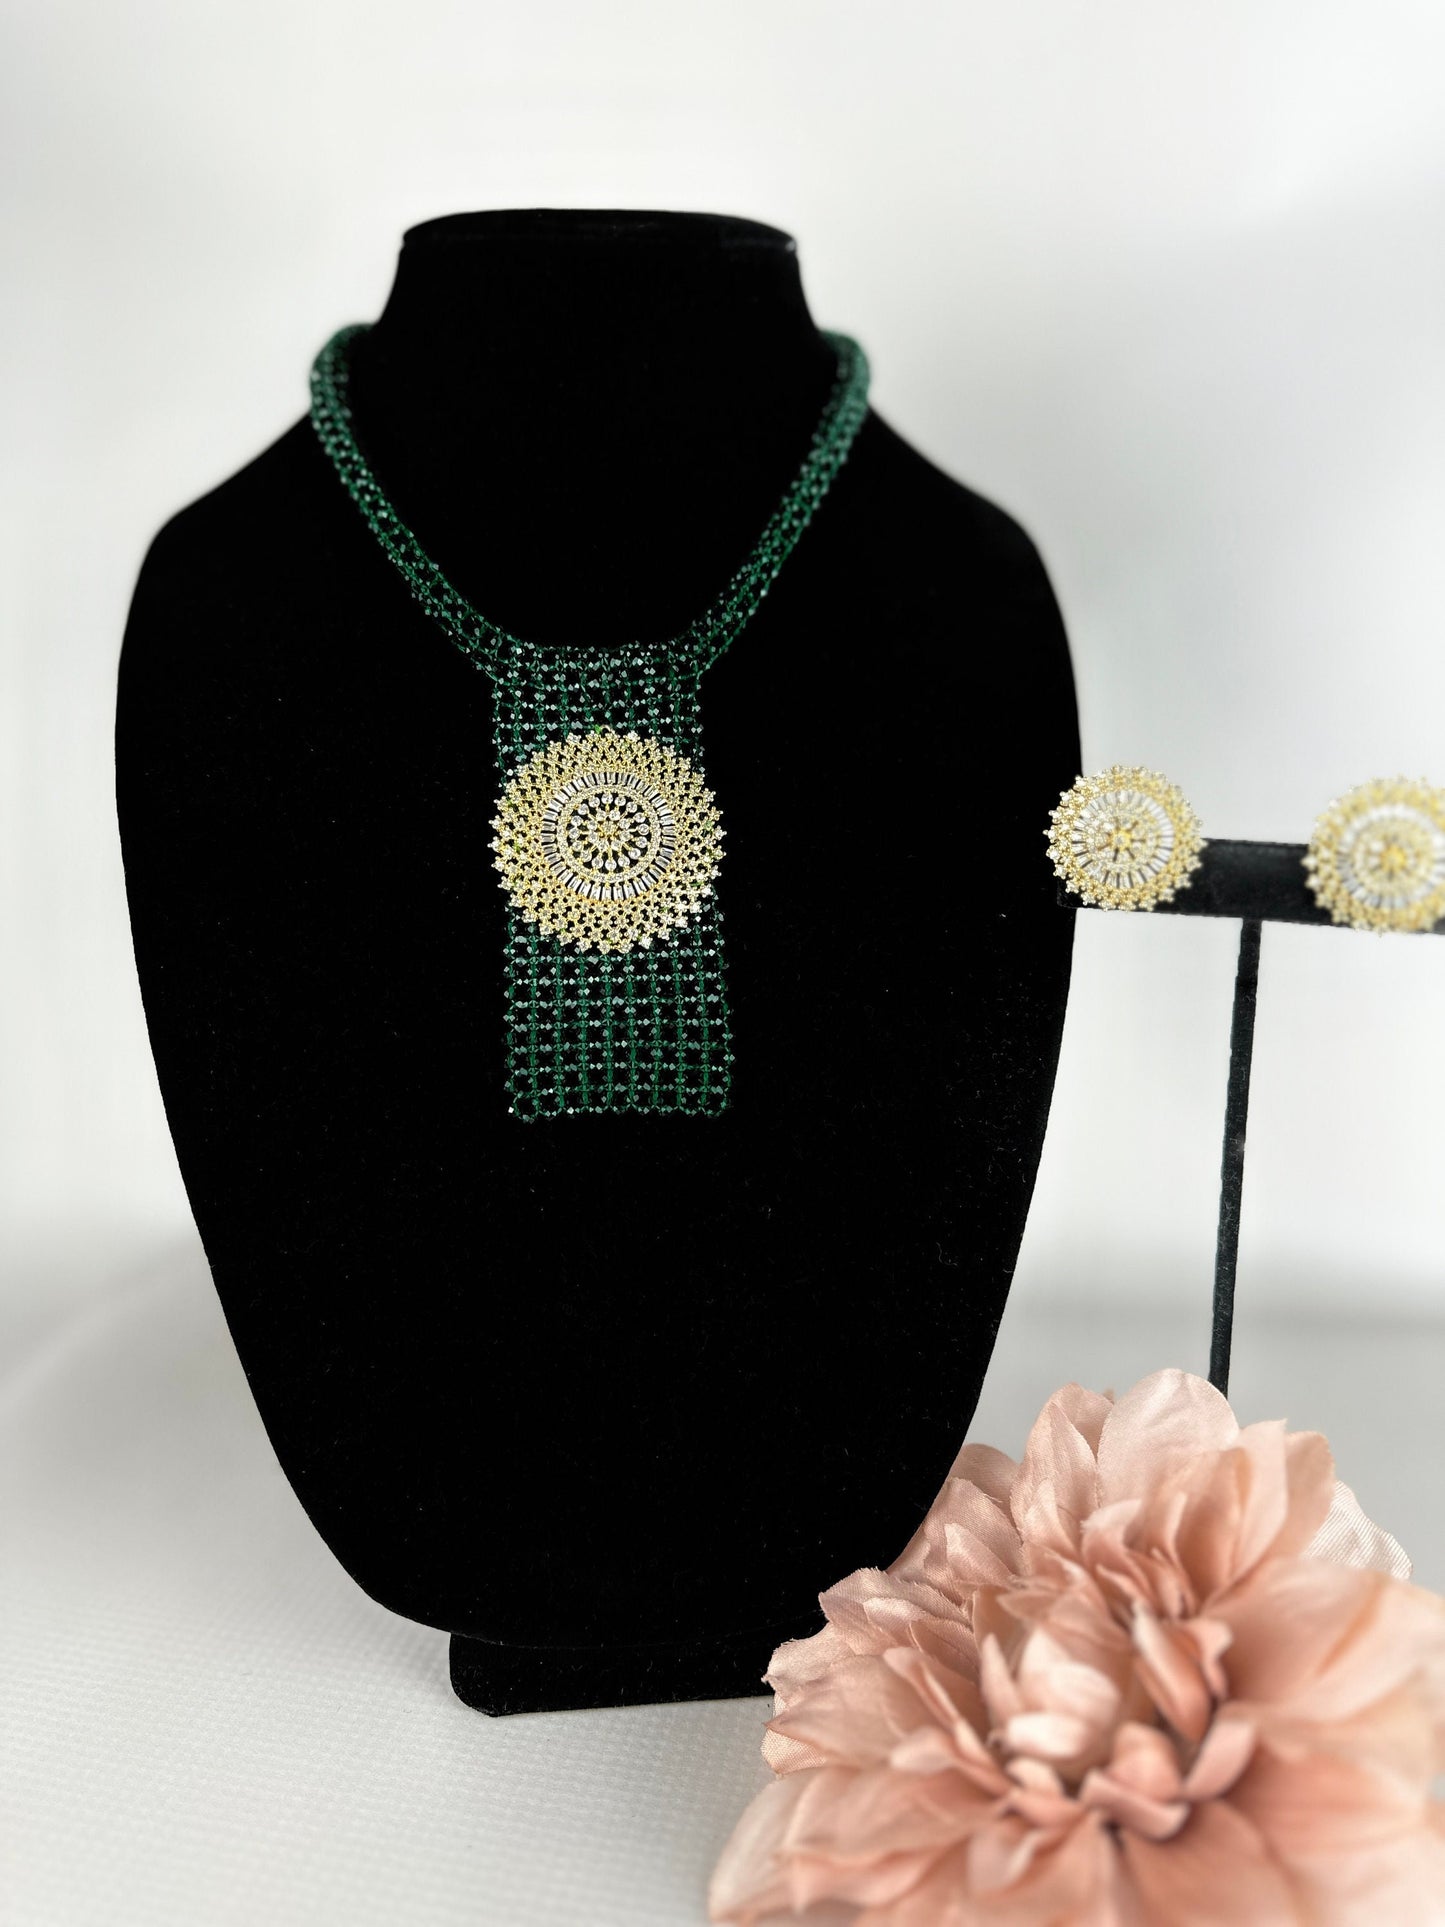 Emerald Hydro beads necklace with gold studs